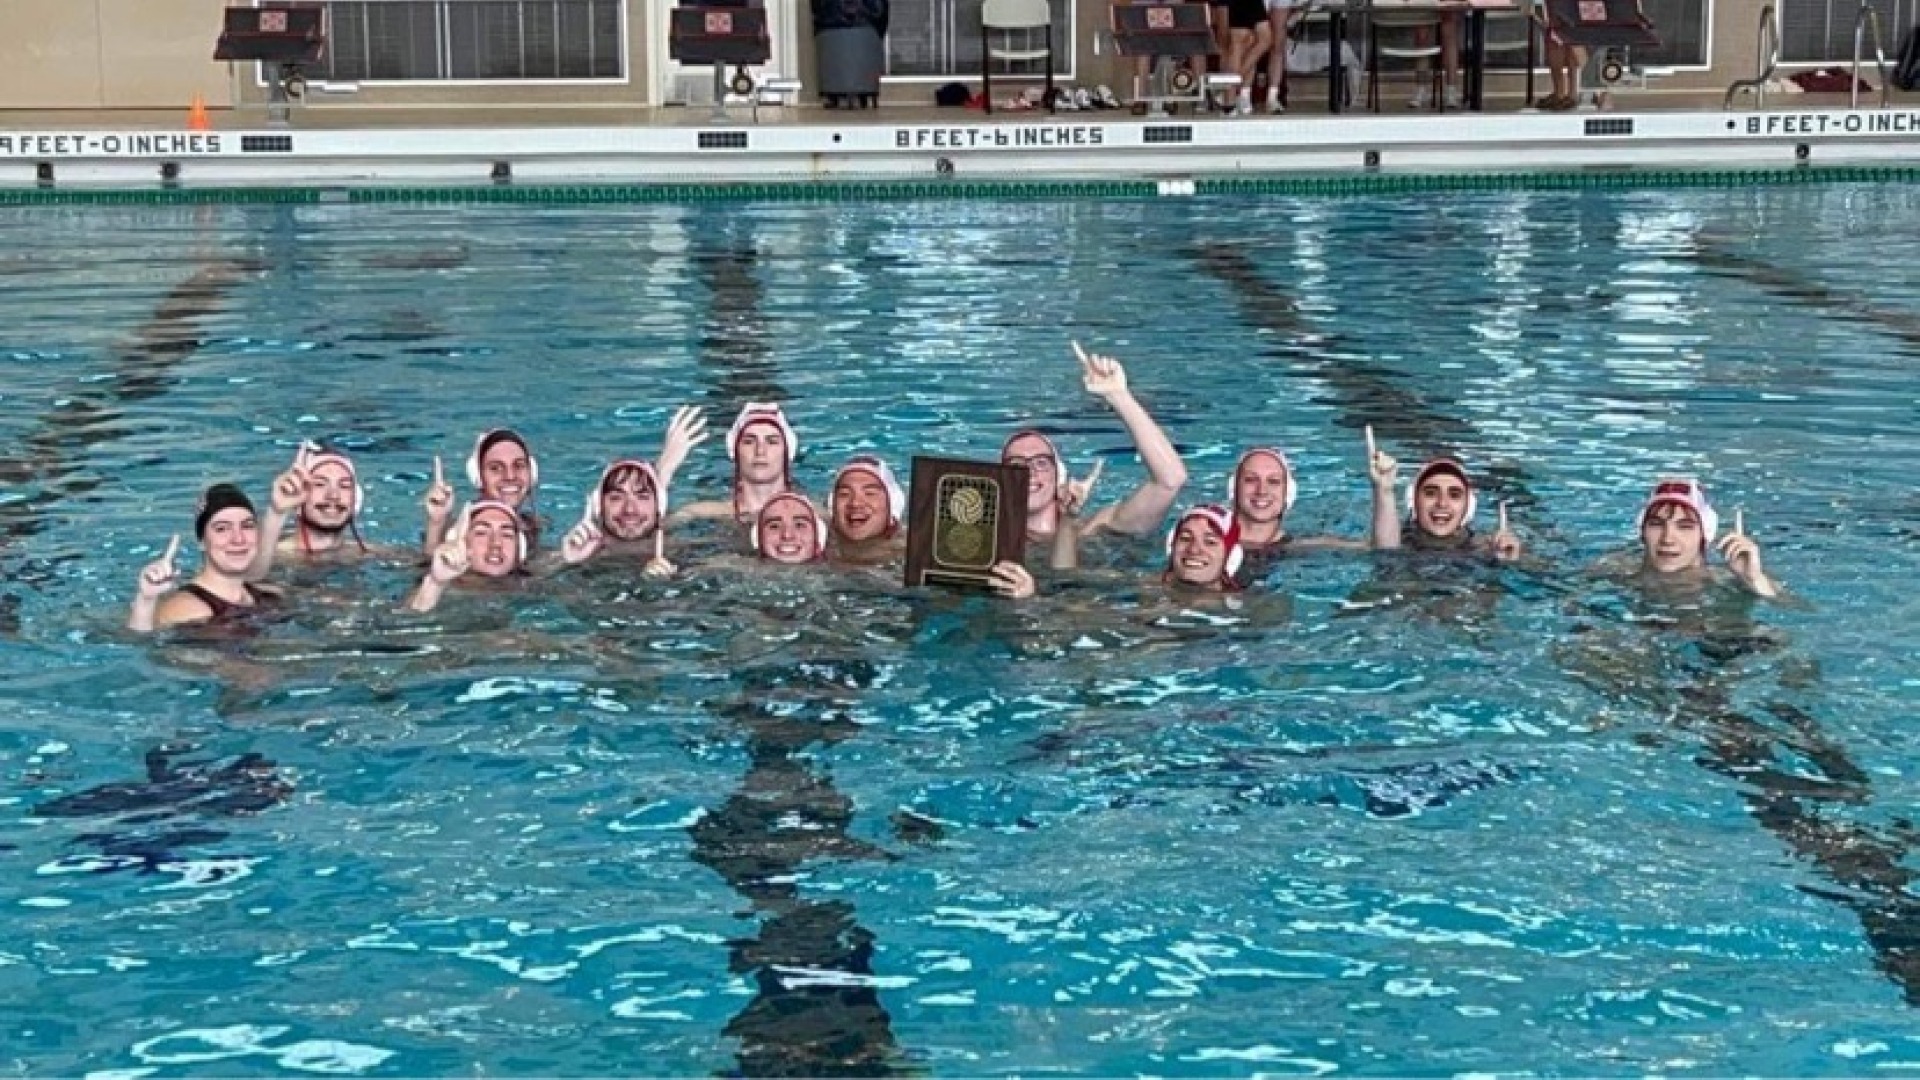 A water polo team is inside a clear swimming pool, one of the members proudly holds up in the water an award plaque in their hands.